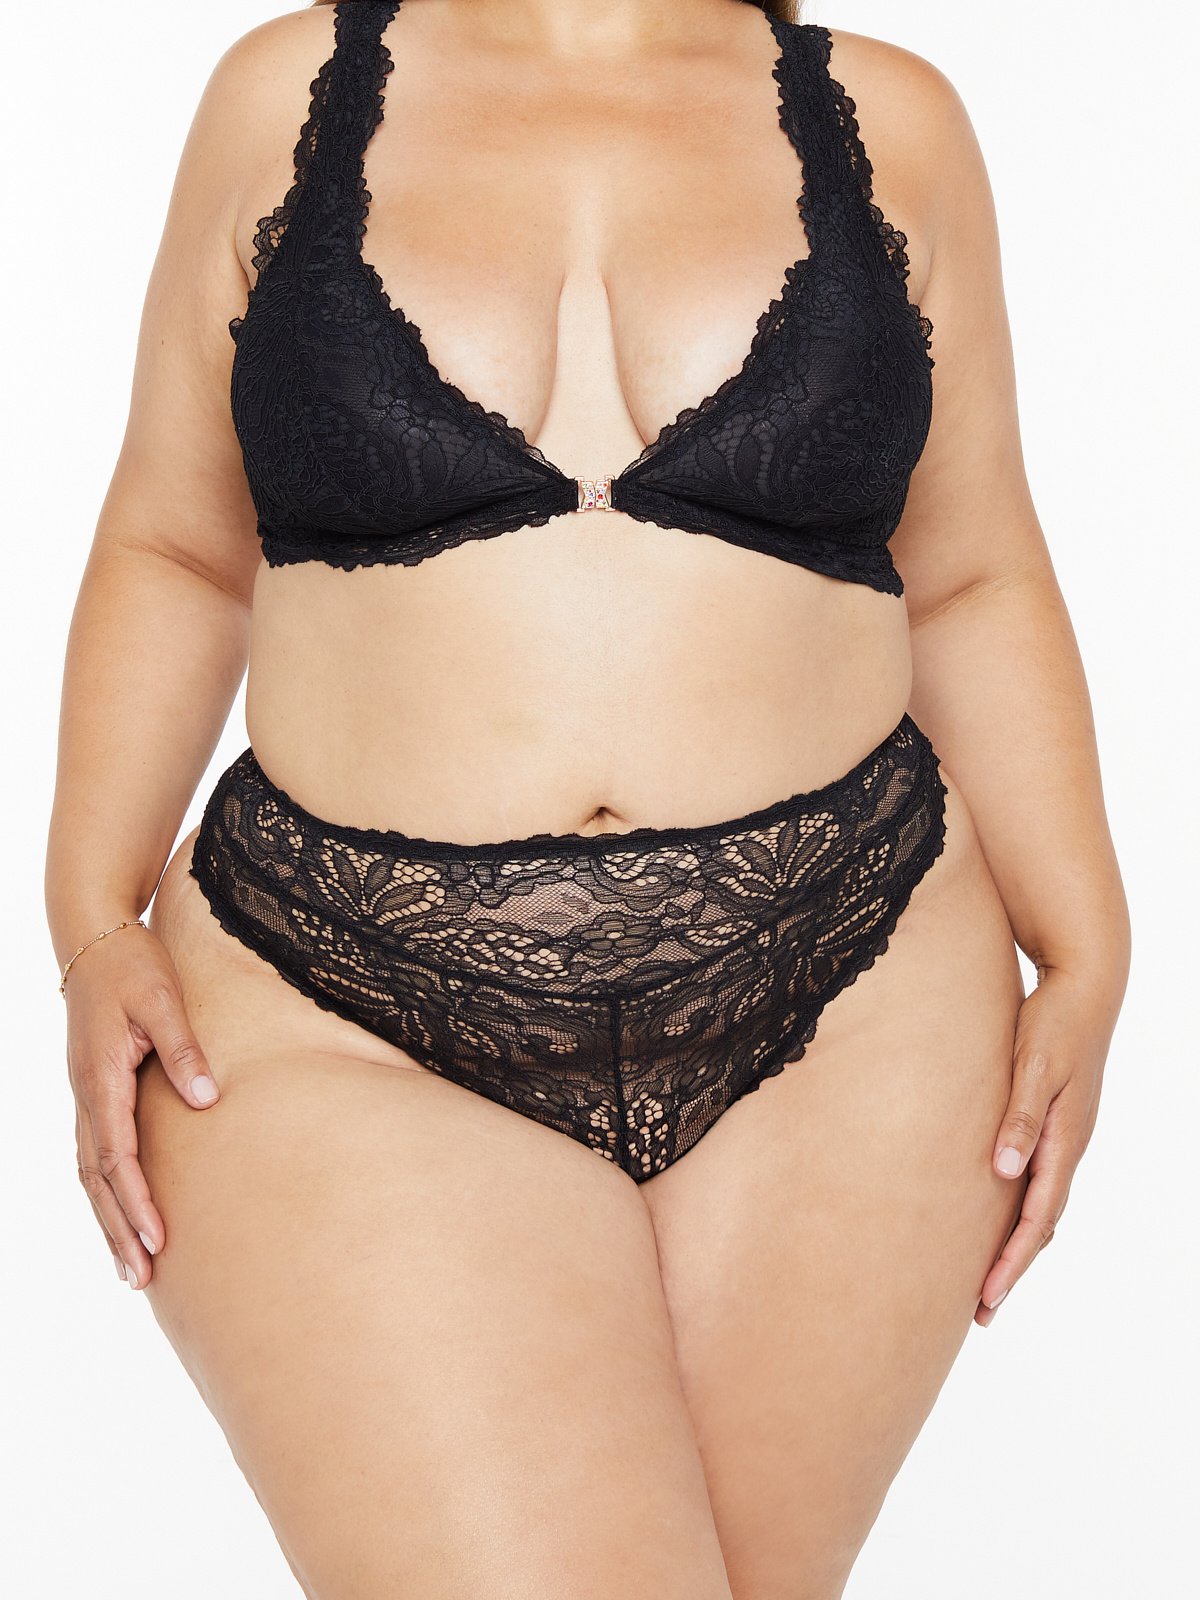 Romantic Corded Lace High-Waist Thong in Black